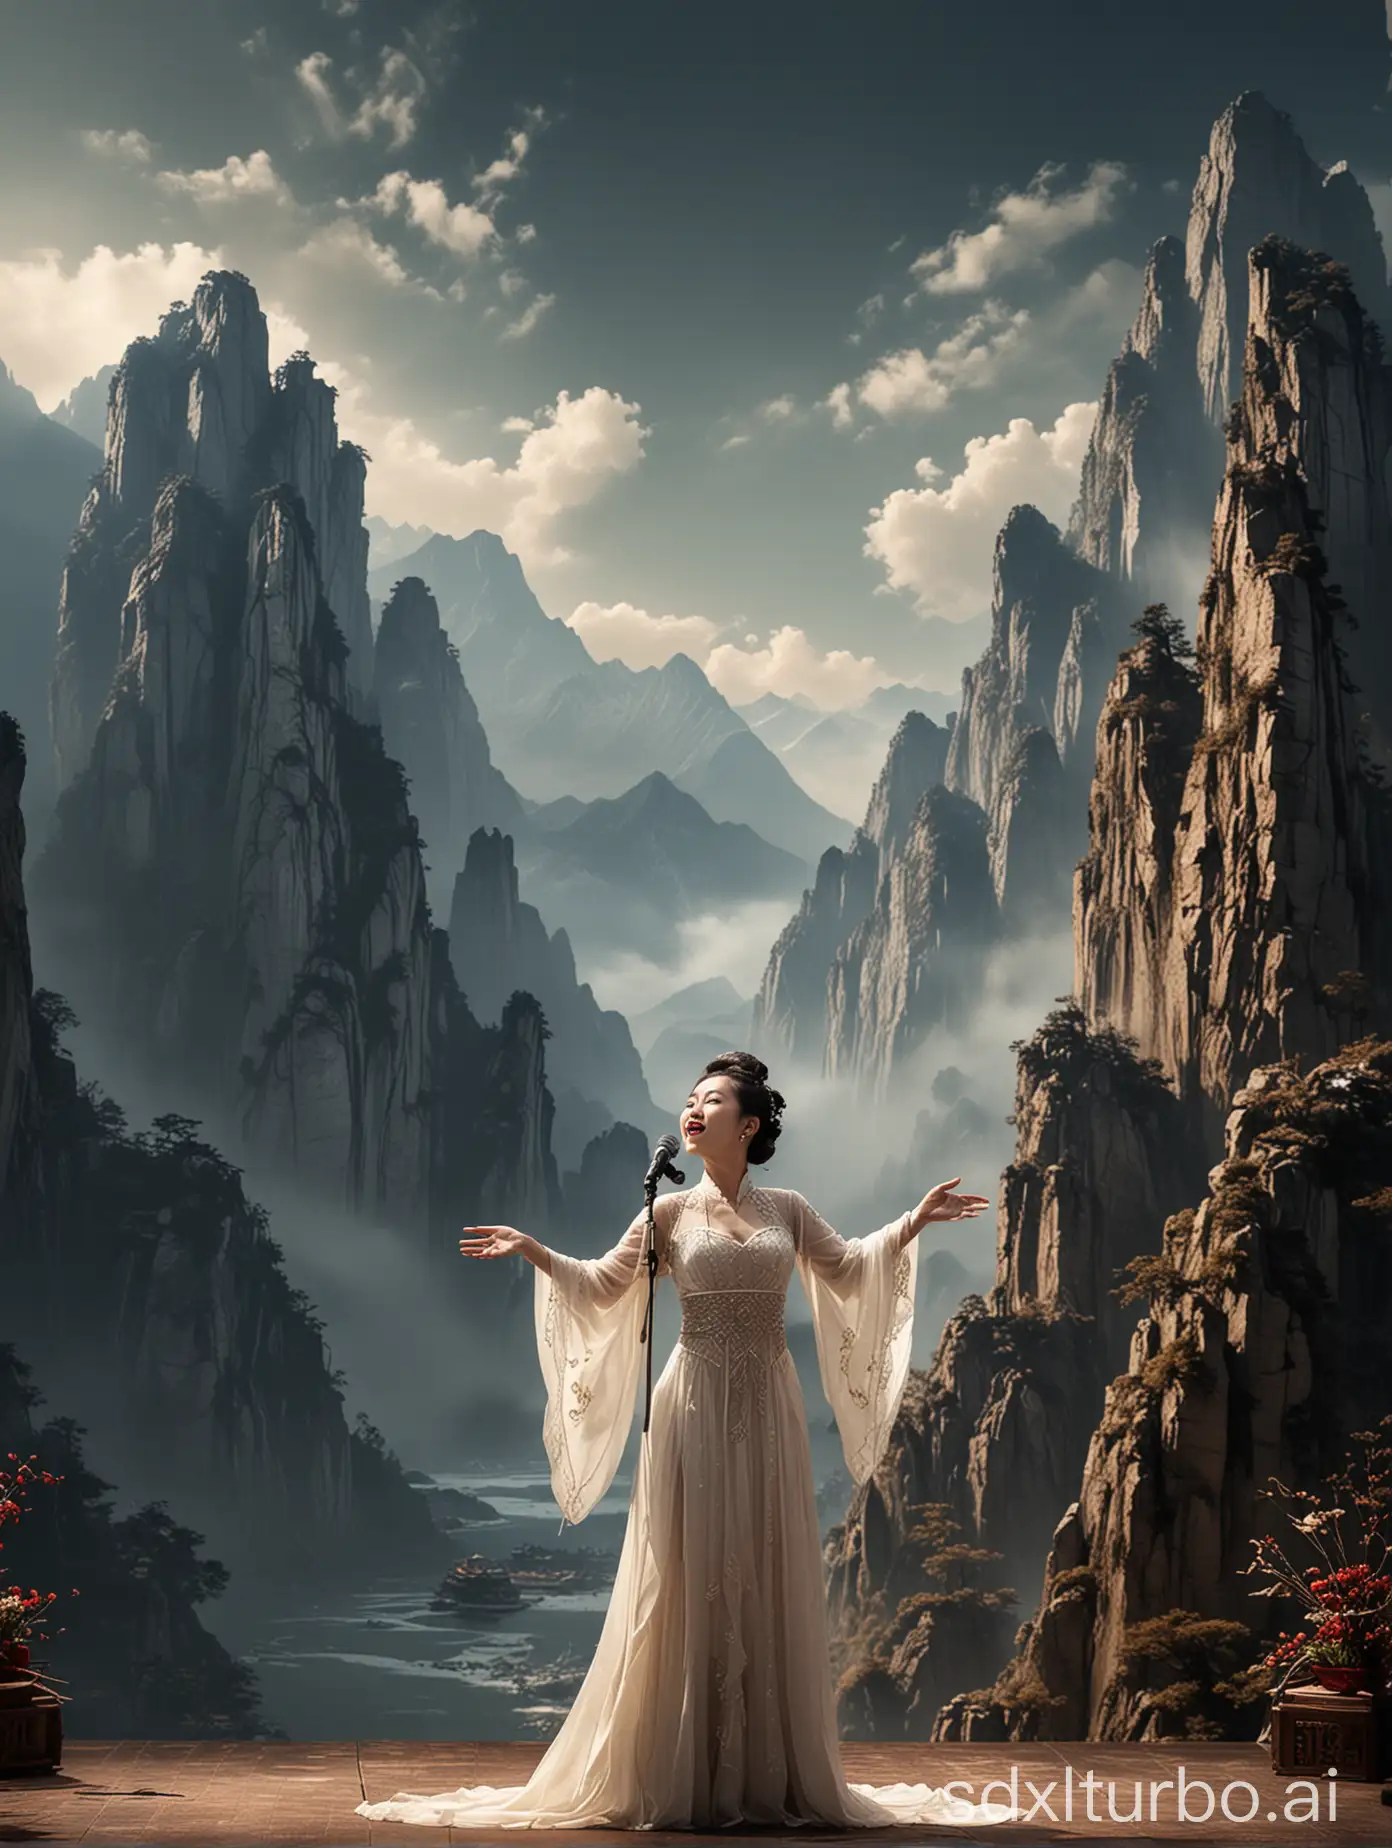 Chinese-Woman-Performing-Amidst-Towering-Mountains